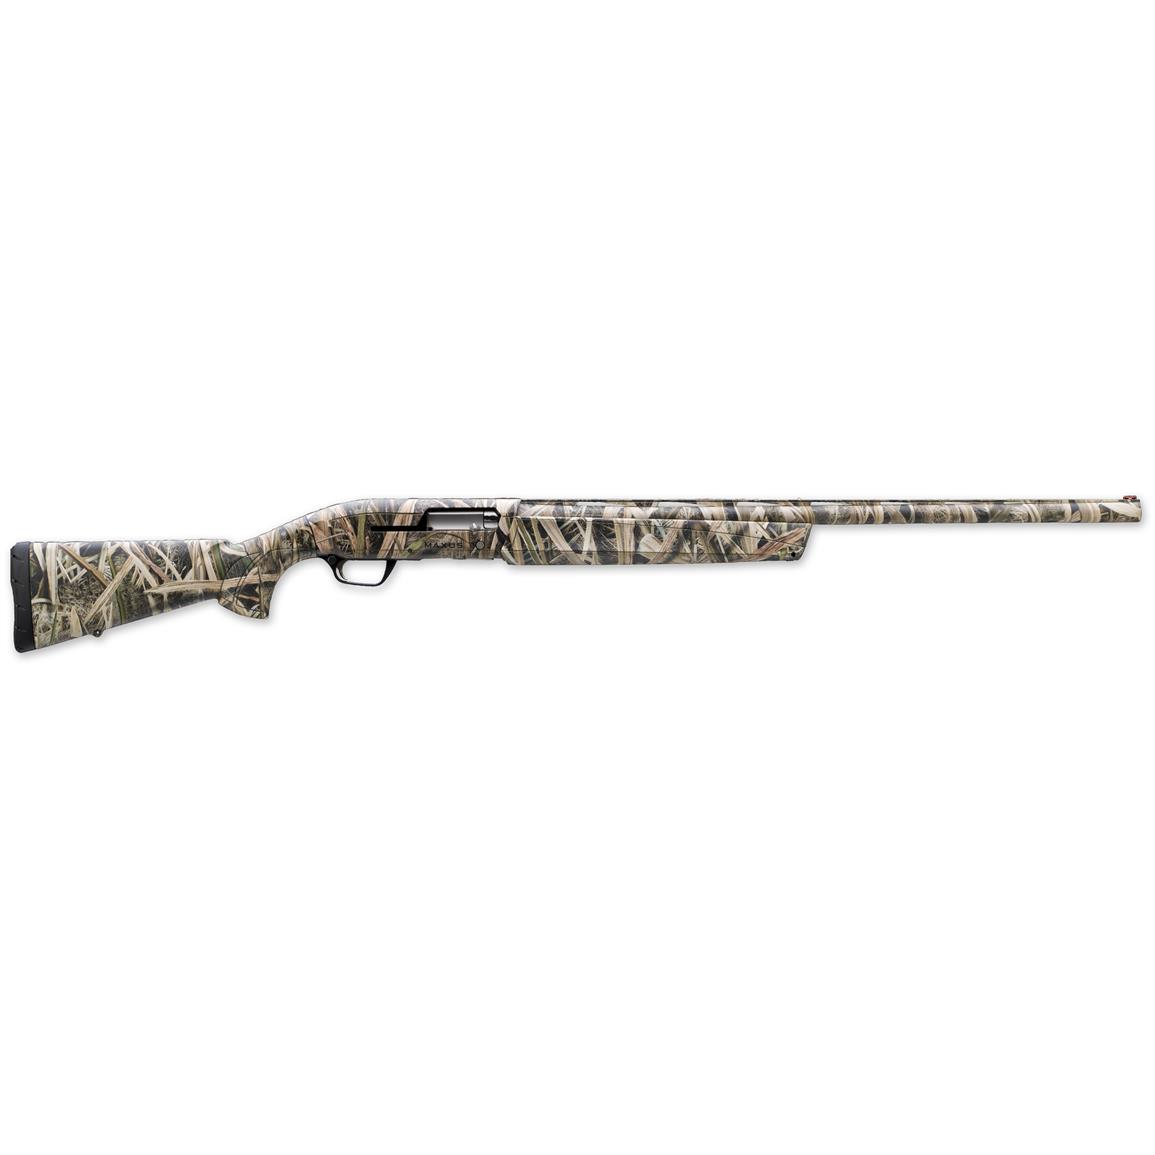 Browning Maxus Mossy Oak Shadow Grass Blades, Semi-Automatic, 12 Gauge, 28" Barrel, 4 1 Rounds